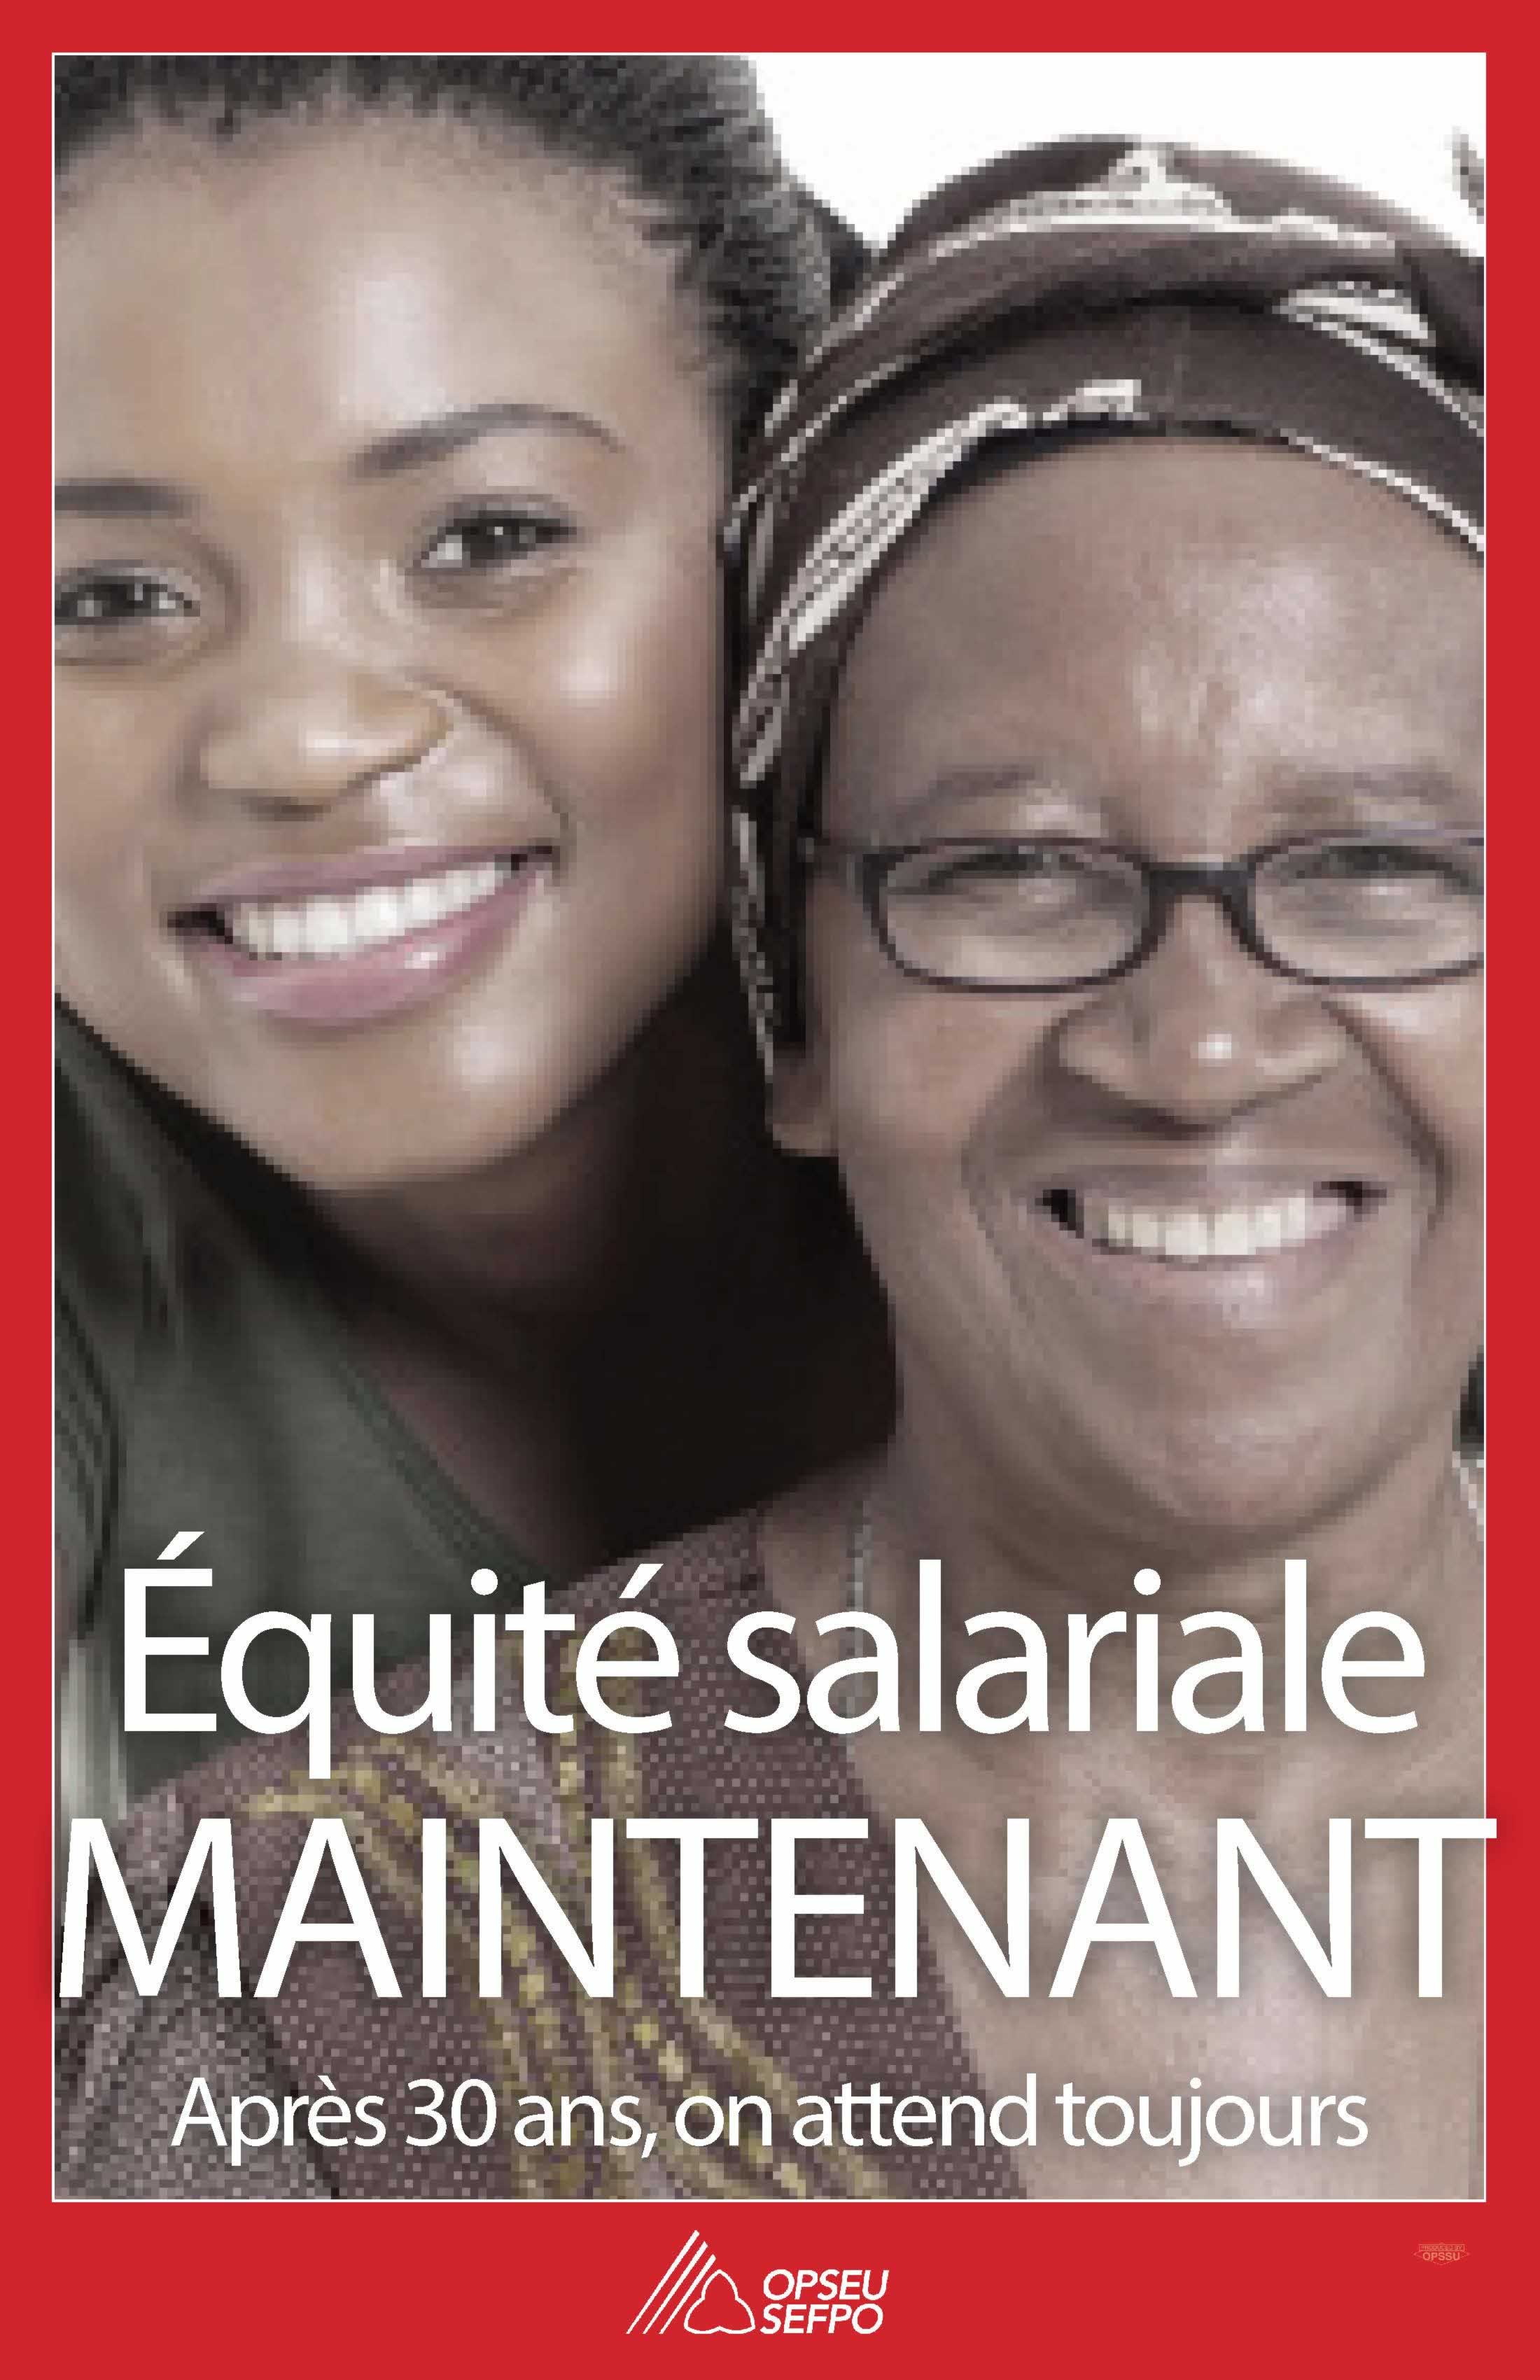 Equite salariale maintenant - Apres 30 ans, on attend toujours. SEFPO